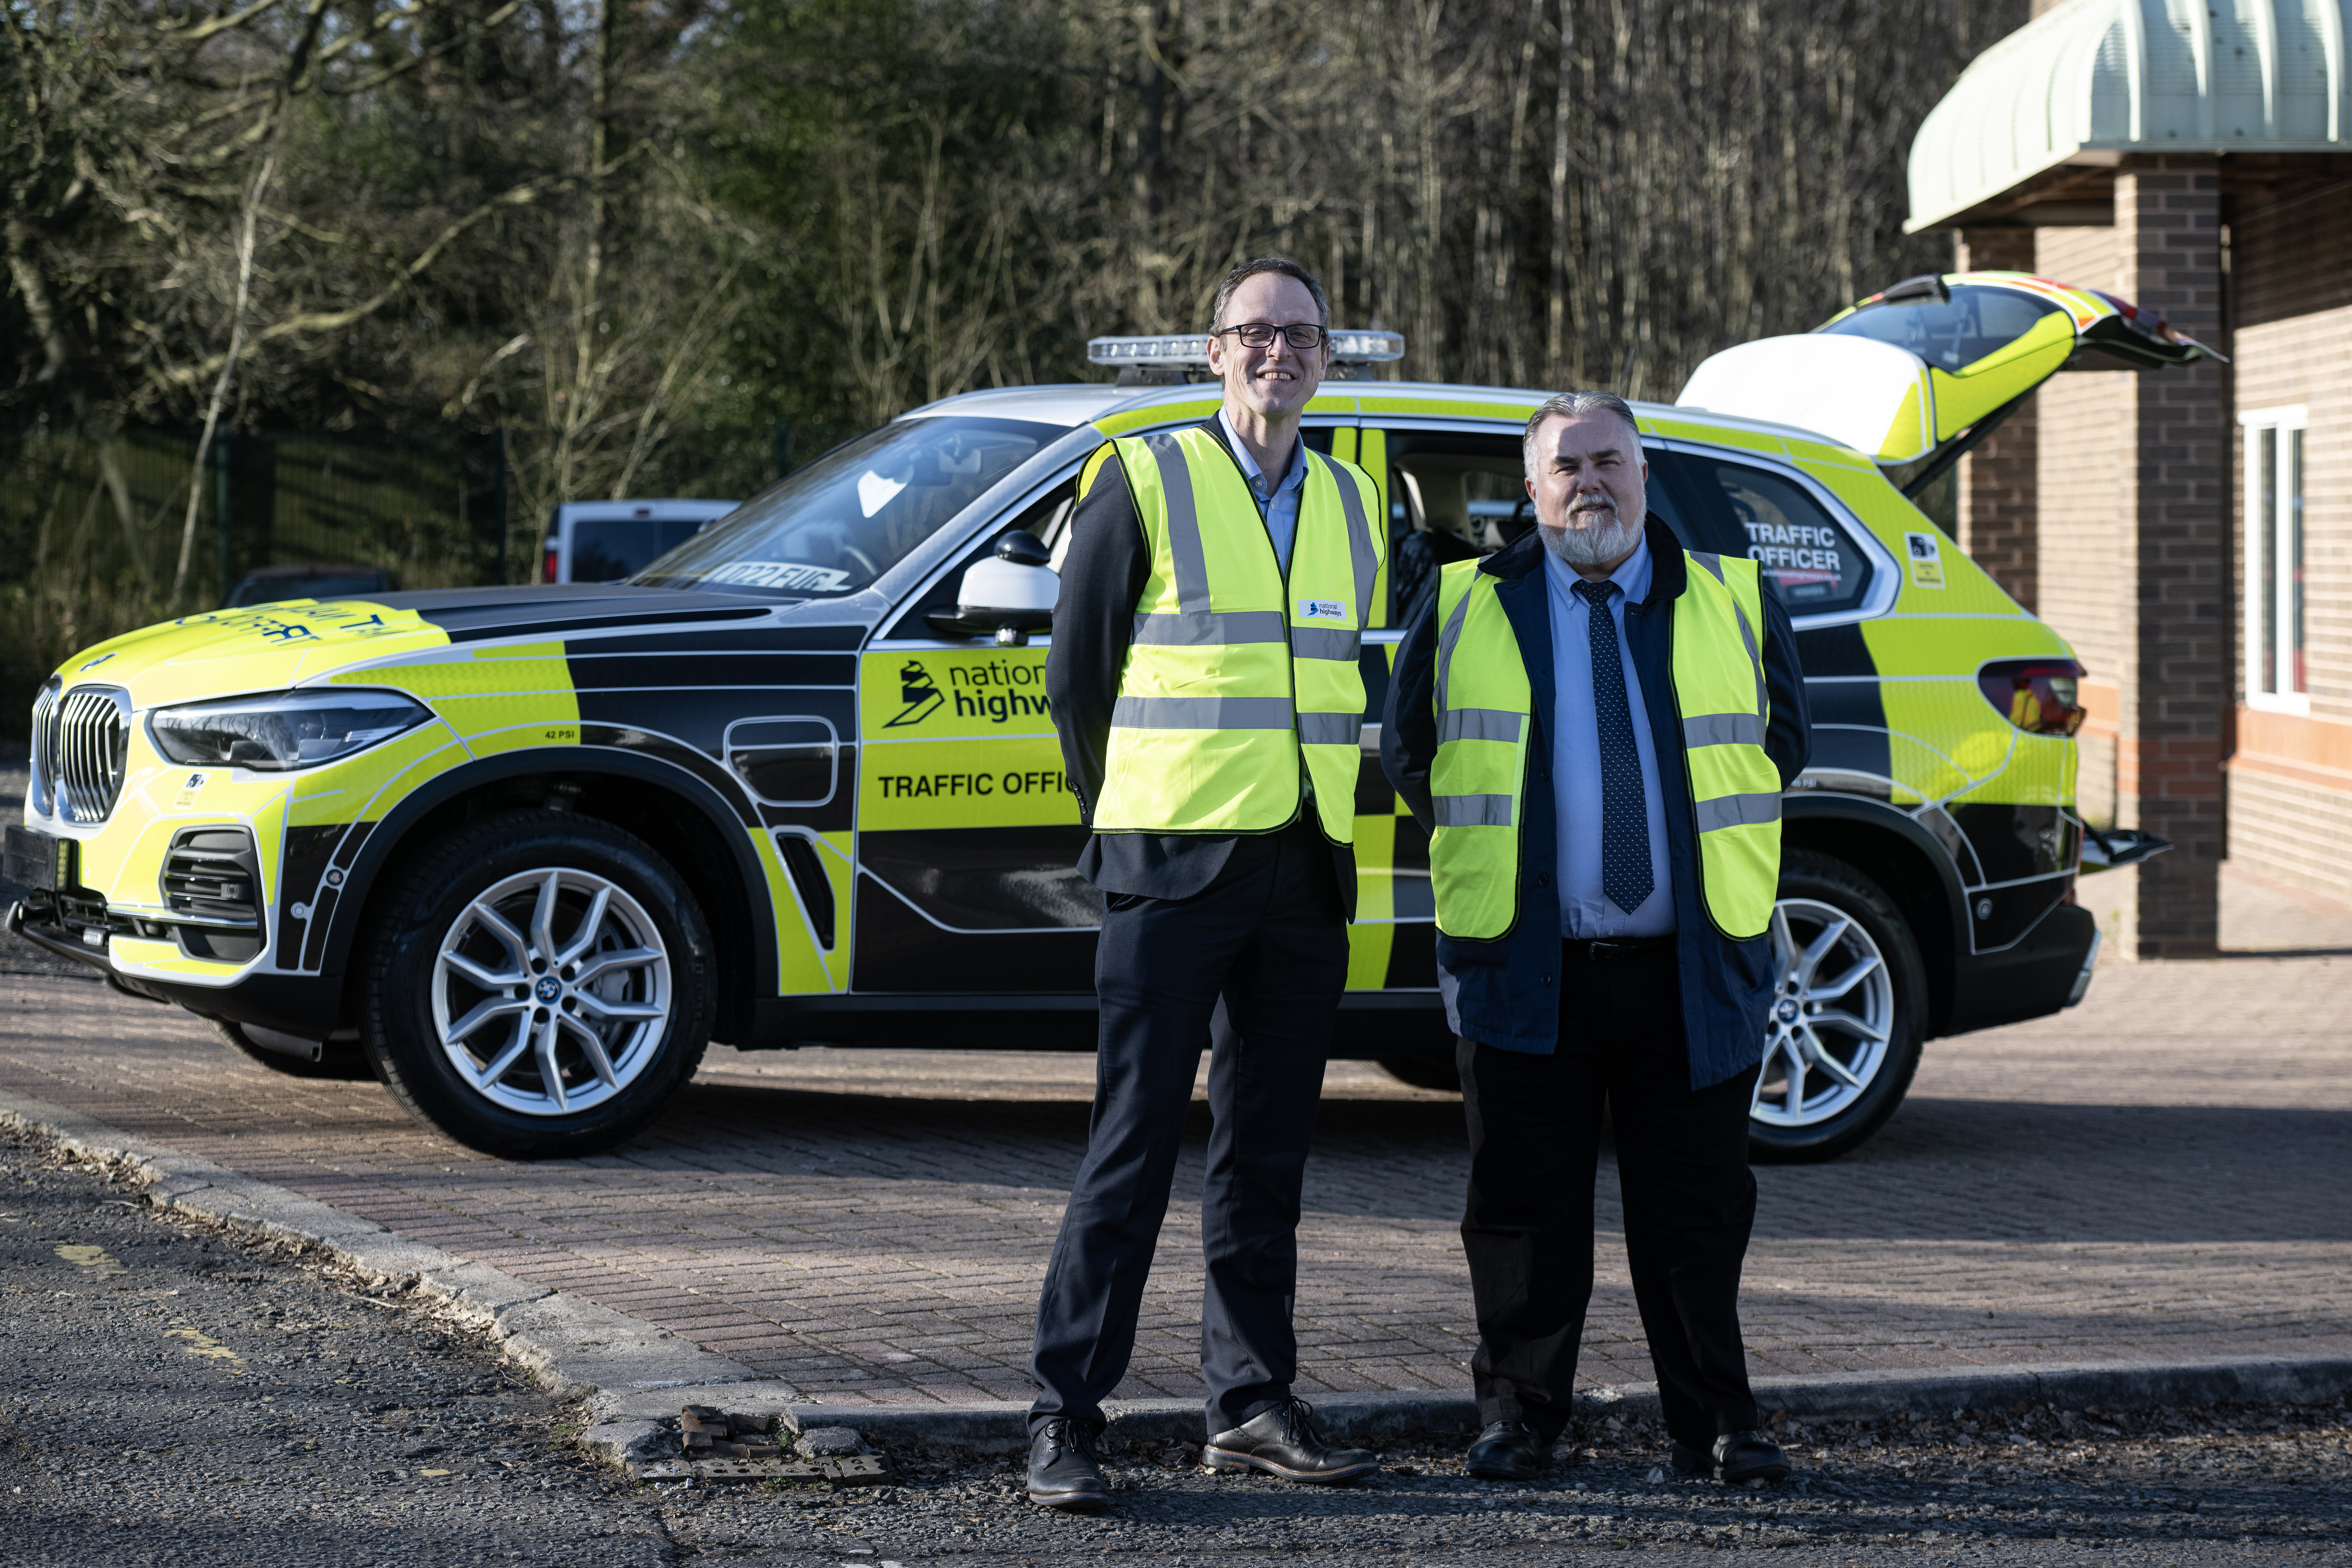 Steve Elderkin, National Highways head of environment and sustainability with David Spooner, Managing Director Safeguard SVP Ltd pictured during a site visit to the Leicestershire offices of Safeguard SVP Ltd.